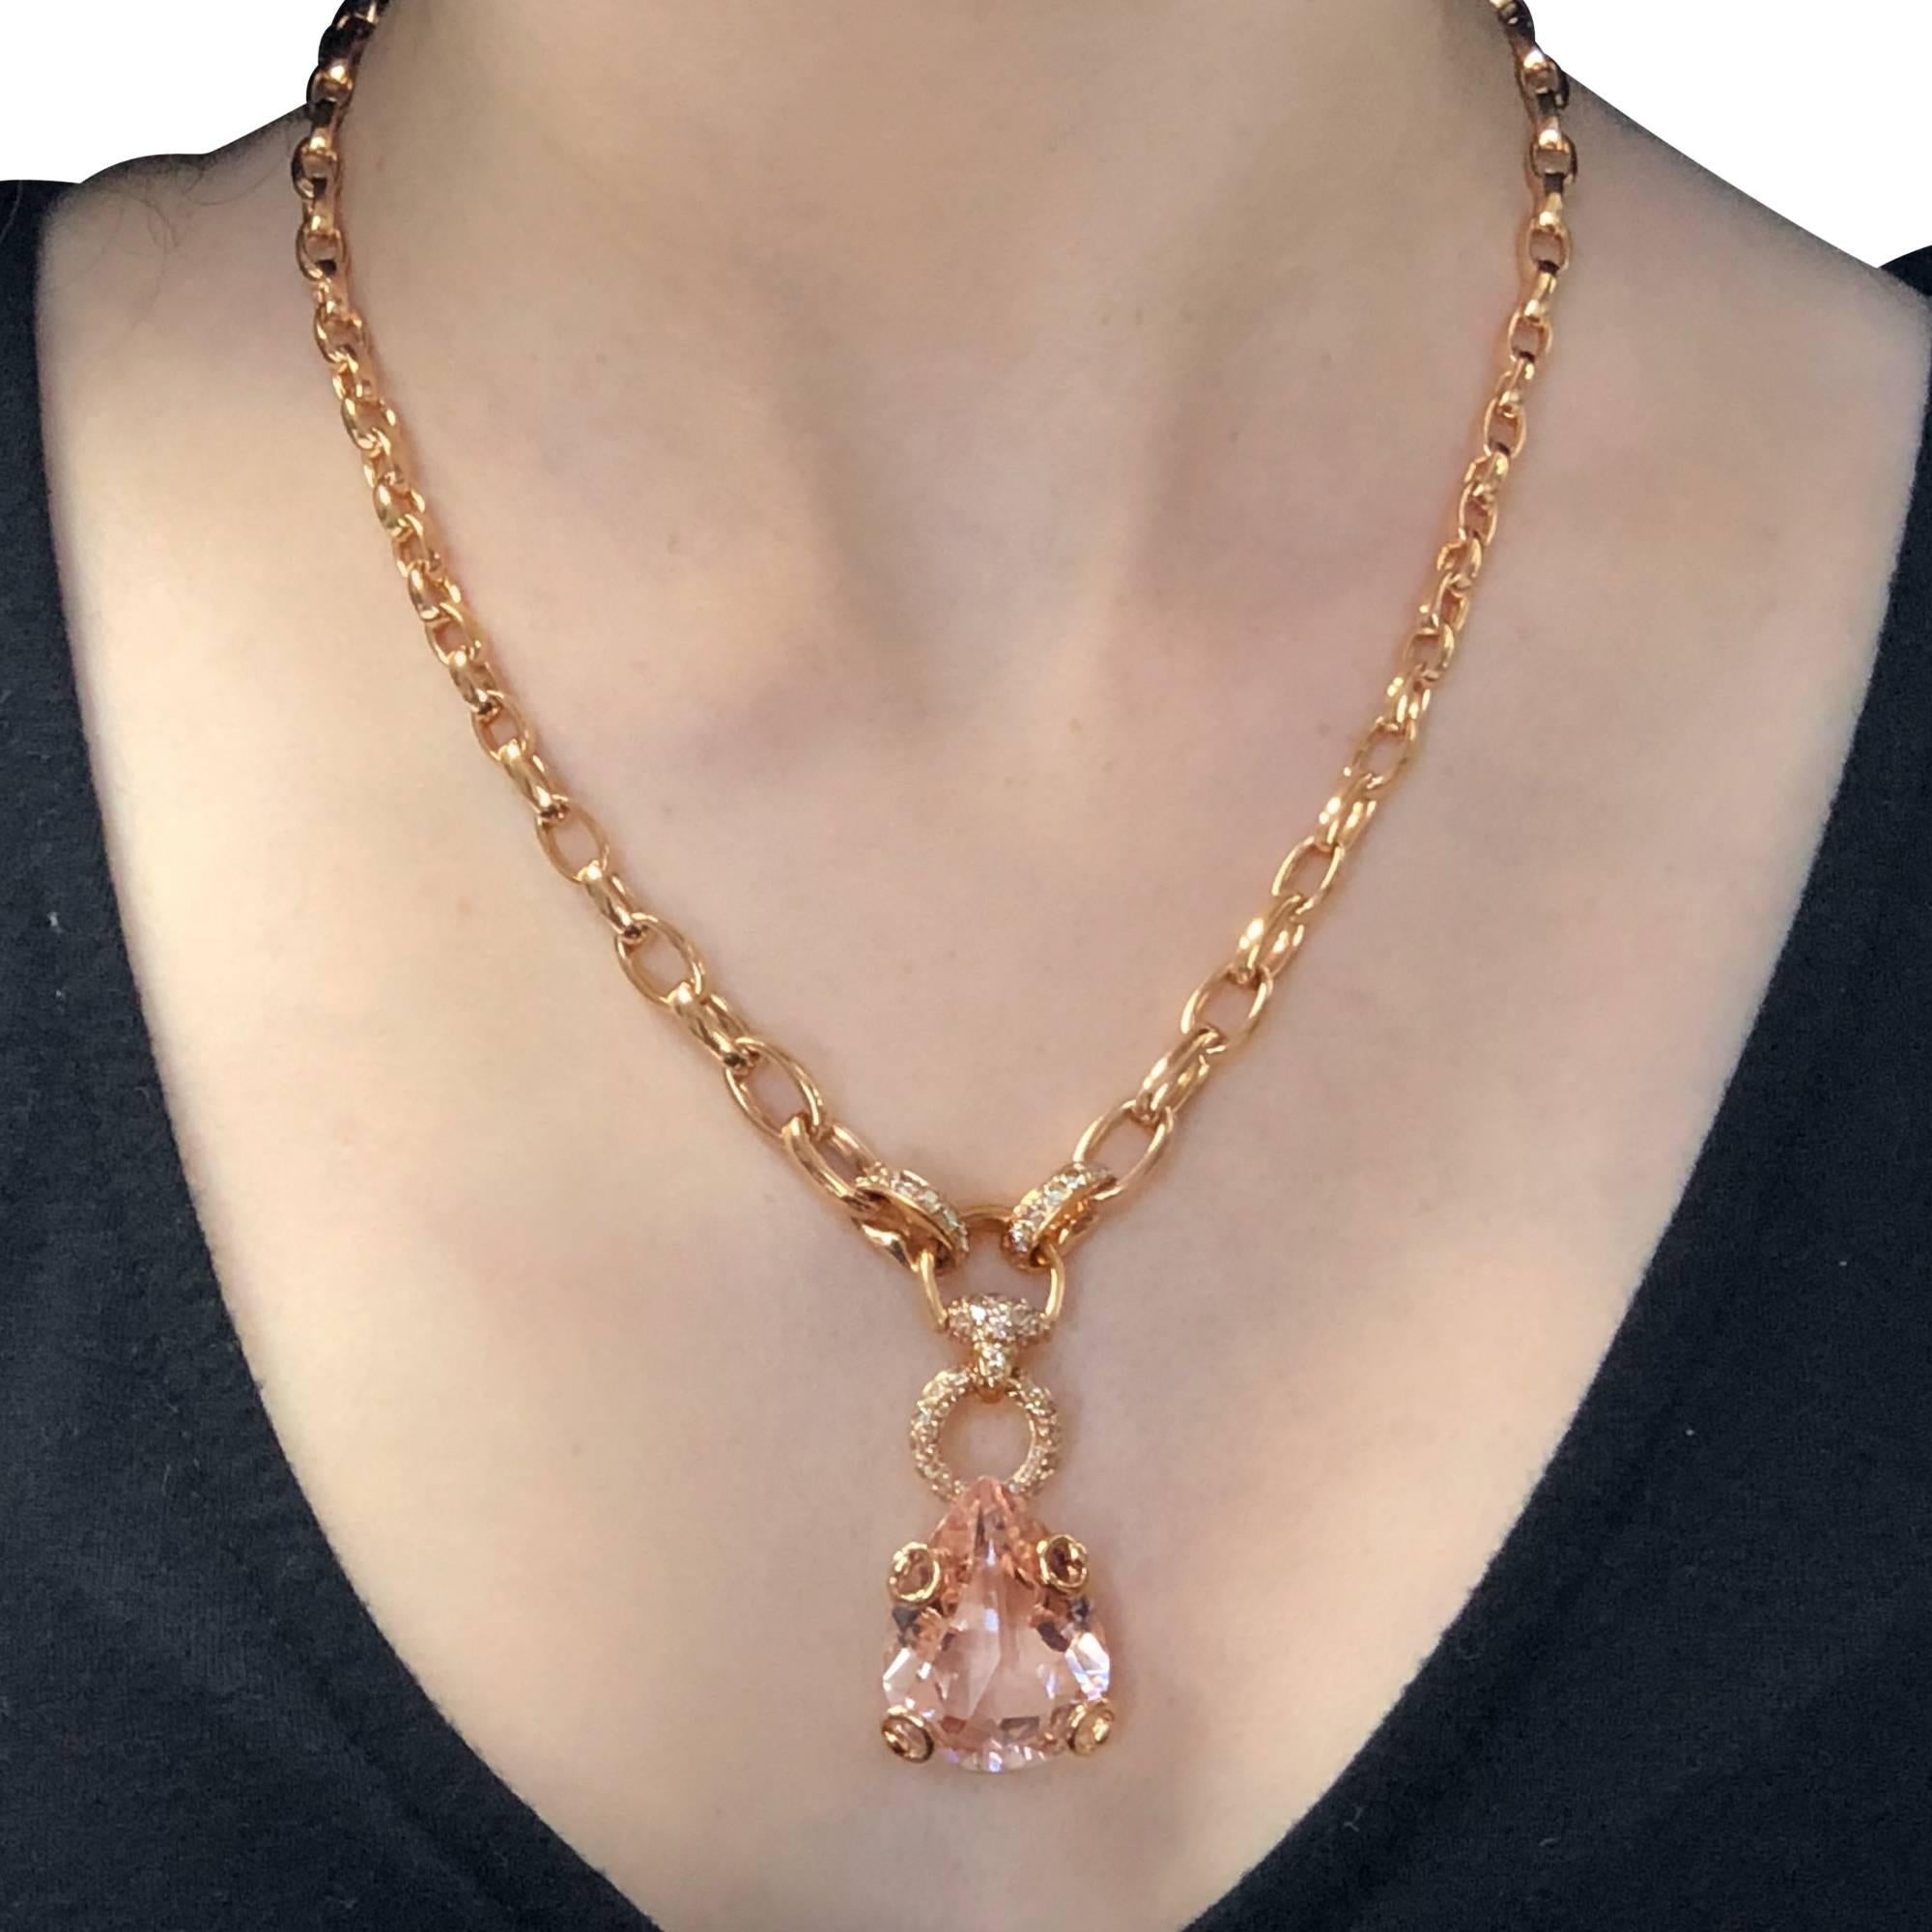 From the house of Gucci, this gorgeous 18 Karat Rose Gold necklace showcases a magnificent pear shape morganite, measuring approximately 1 inch by .8 of an inch accented by 62 round brilliant cut diamonds. The necklace is 17.5 inches in length, and